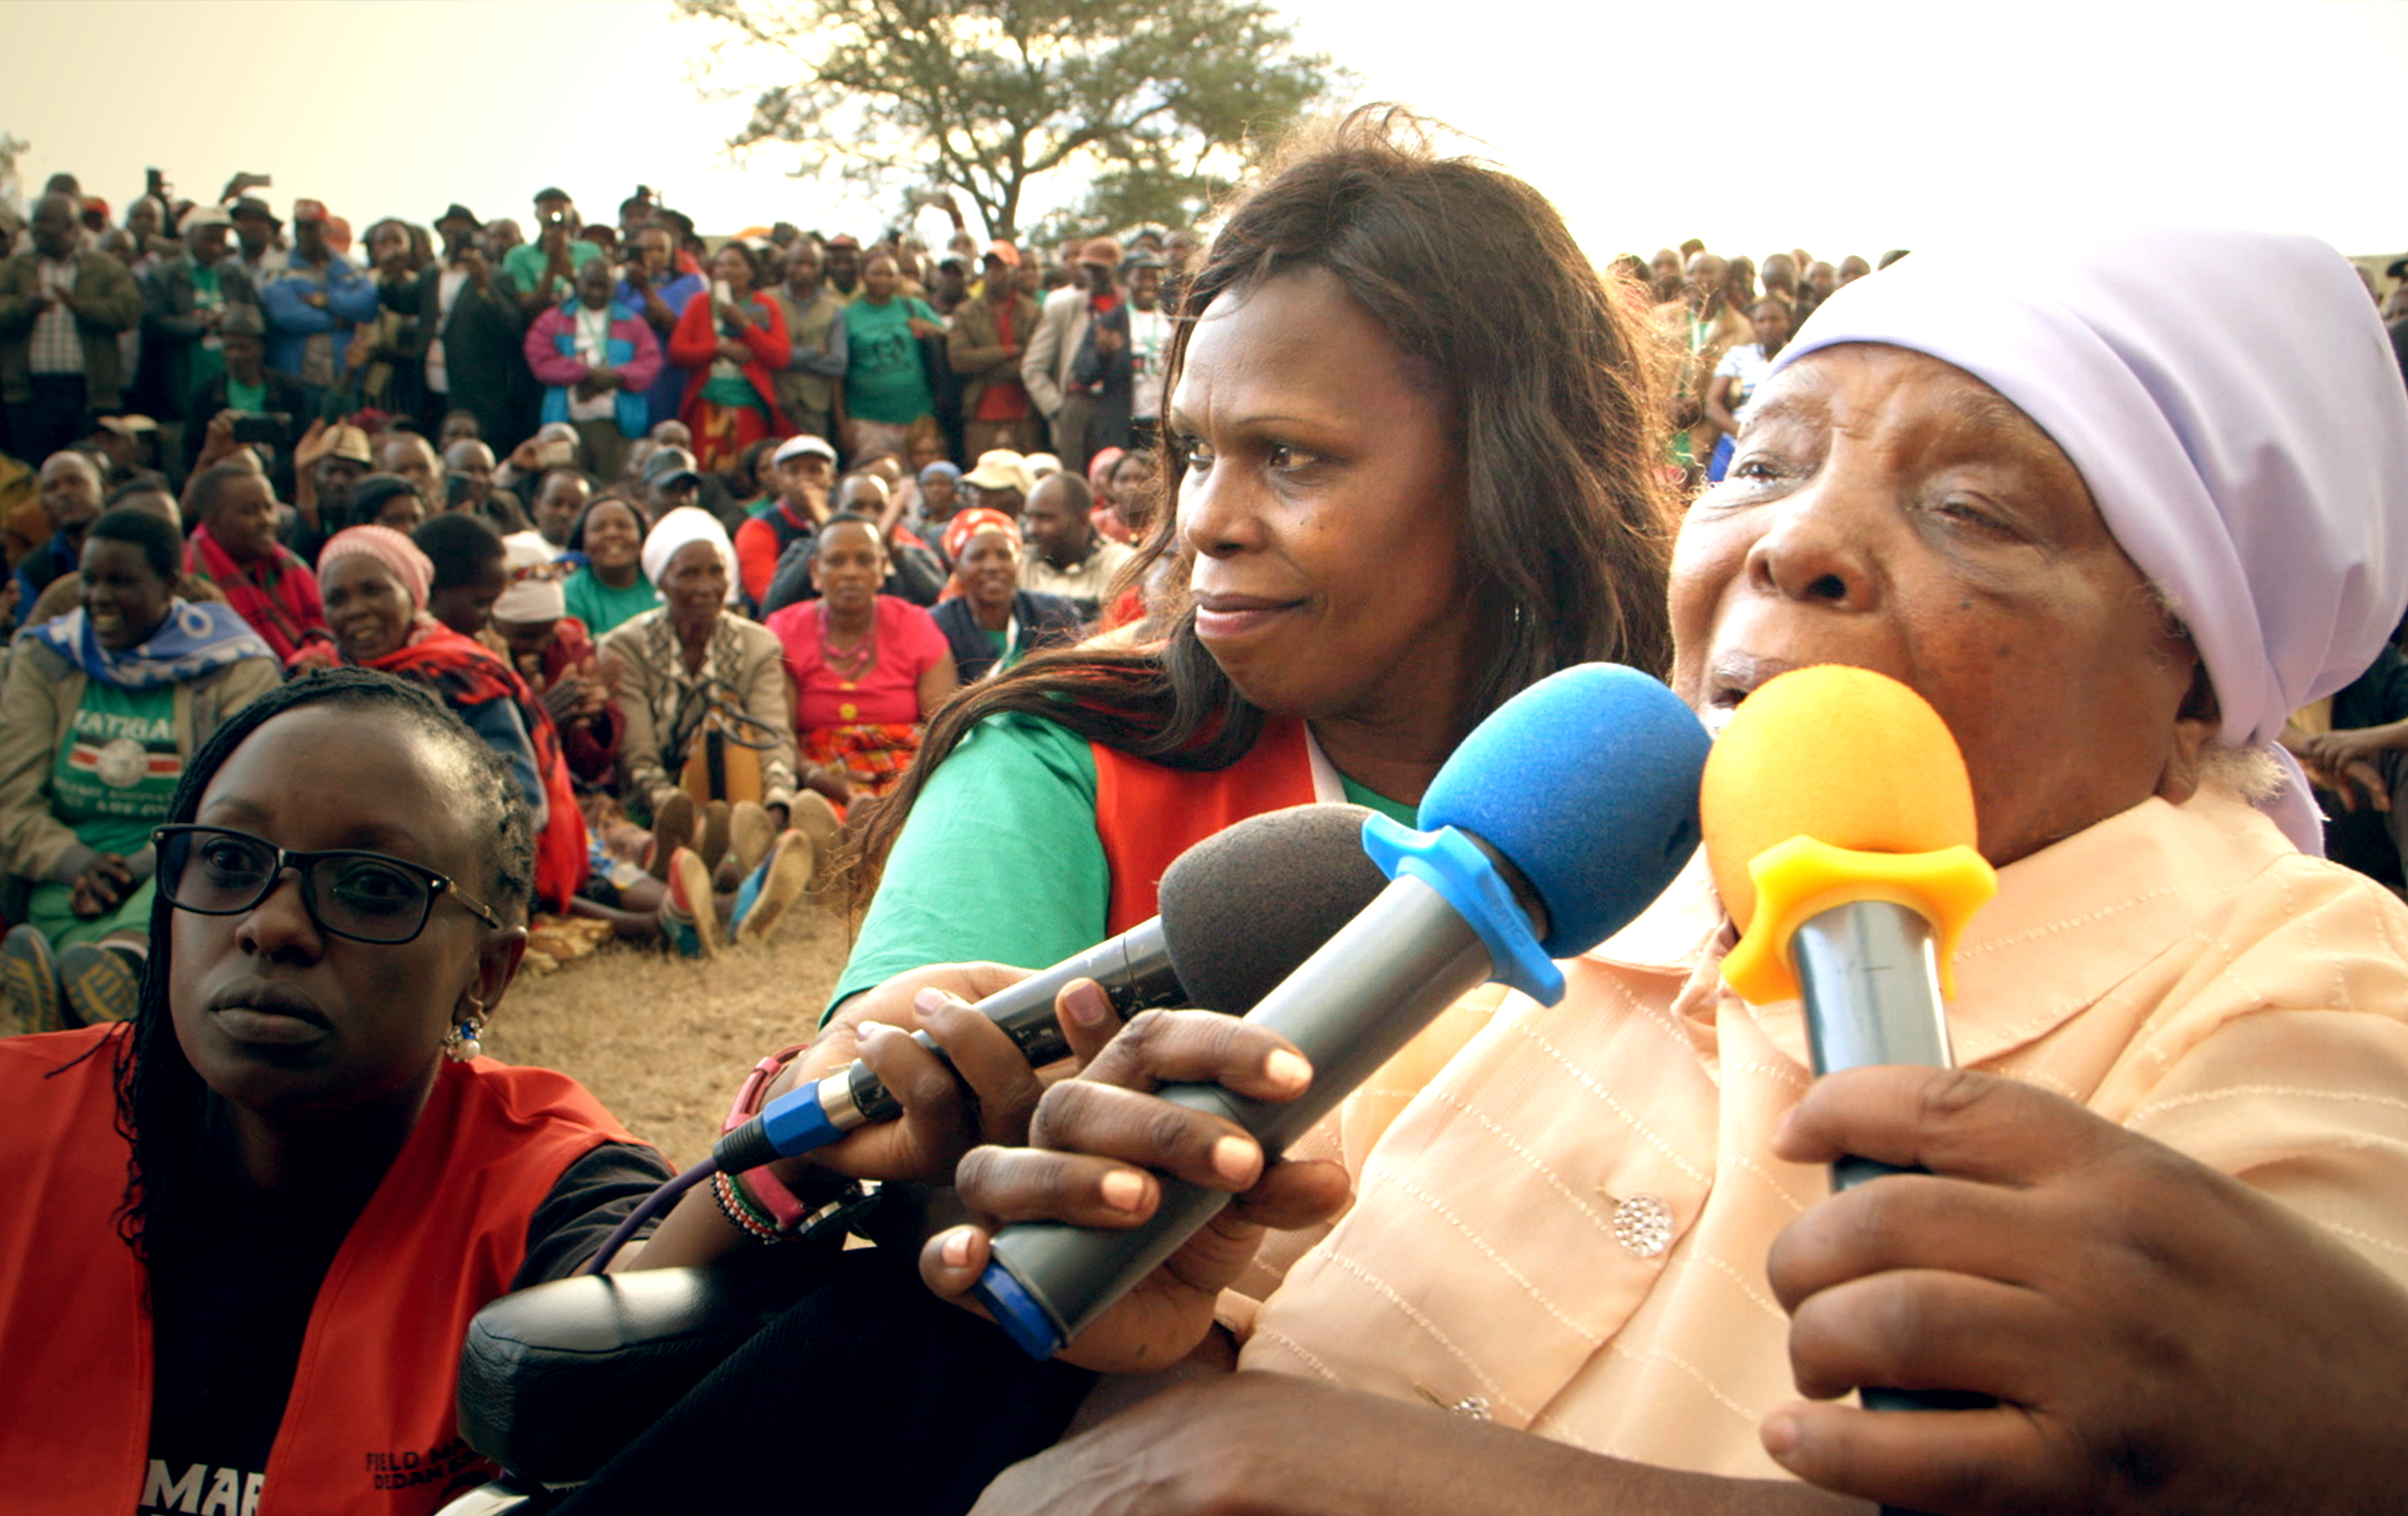 A film still from Our Land, Our Freedom that shows an elderly Black woman surrounded by several microphones, her face a picture of determination as she is mid-sentence. She wears a purple hat, and beside her are two women in red vests, also holding microphones. Behind them, is a large group of Black individuals, some standing and others sitting, focusing intently on the elderly woman as she speaks.